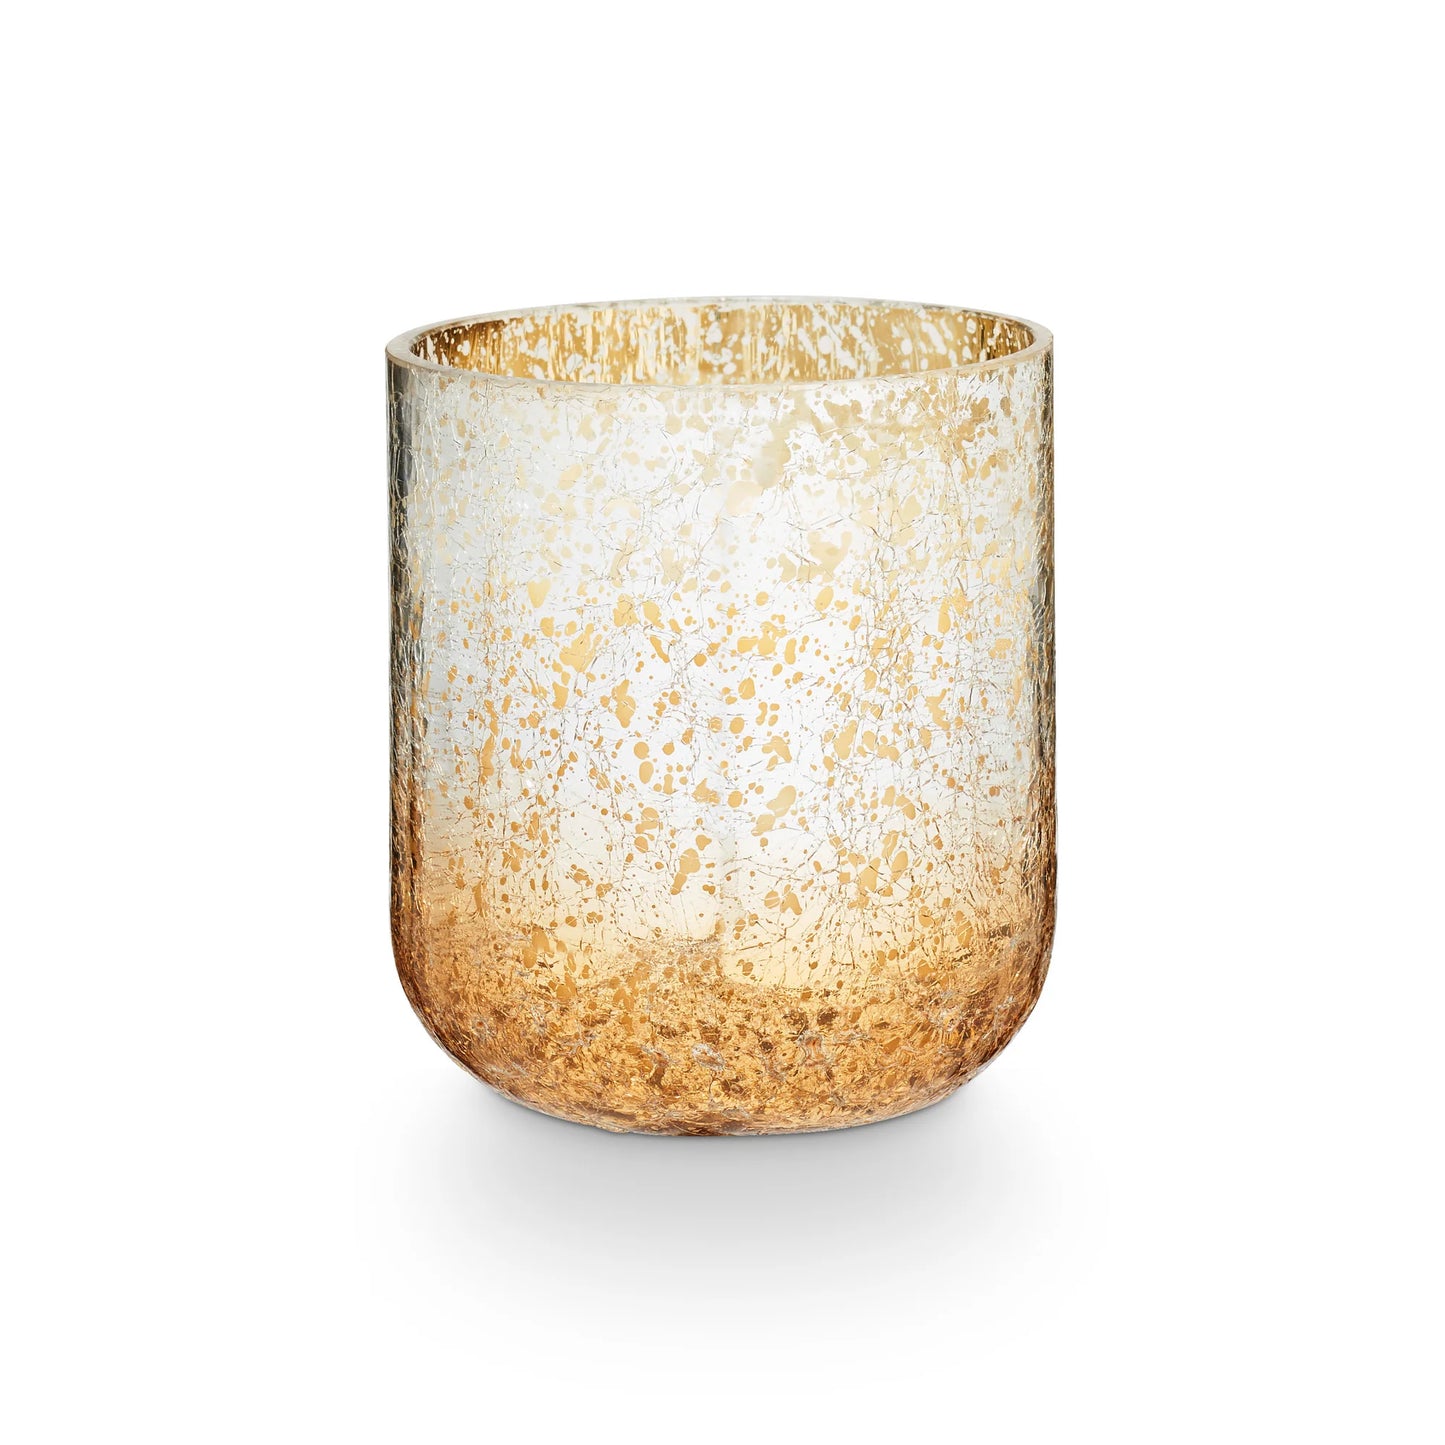 Balsam & Cedar Radiant Crackle Glass Candle - Small